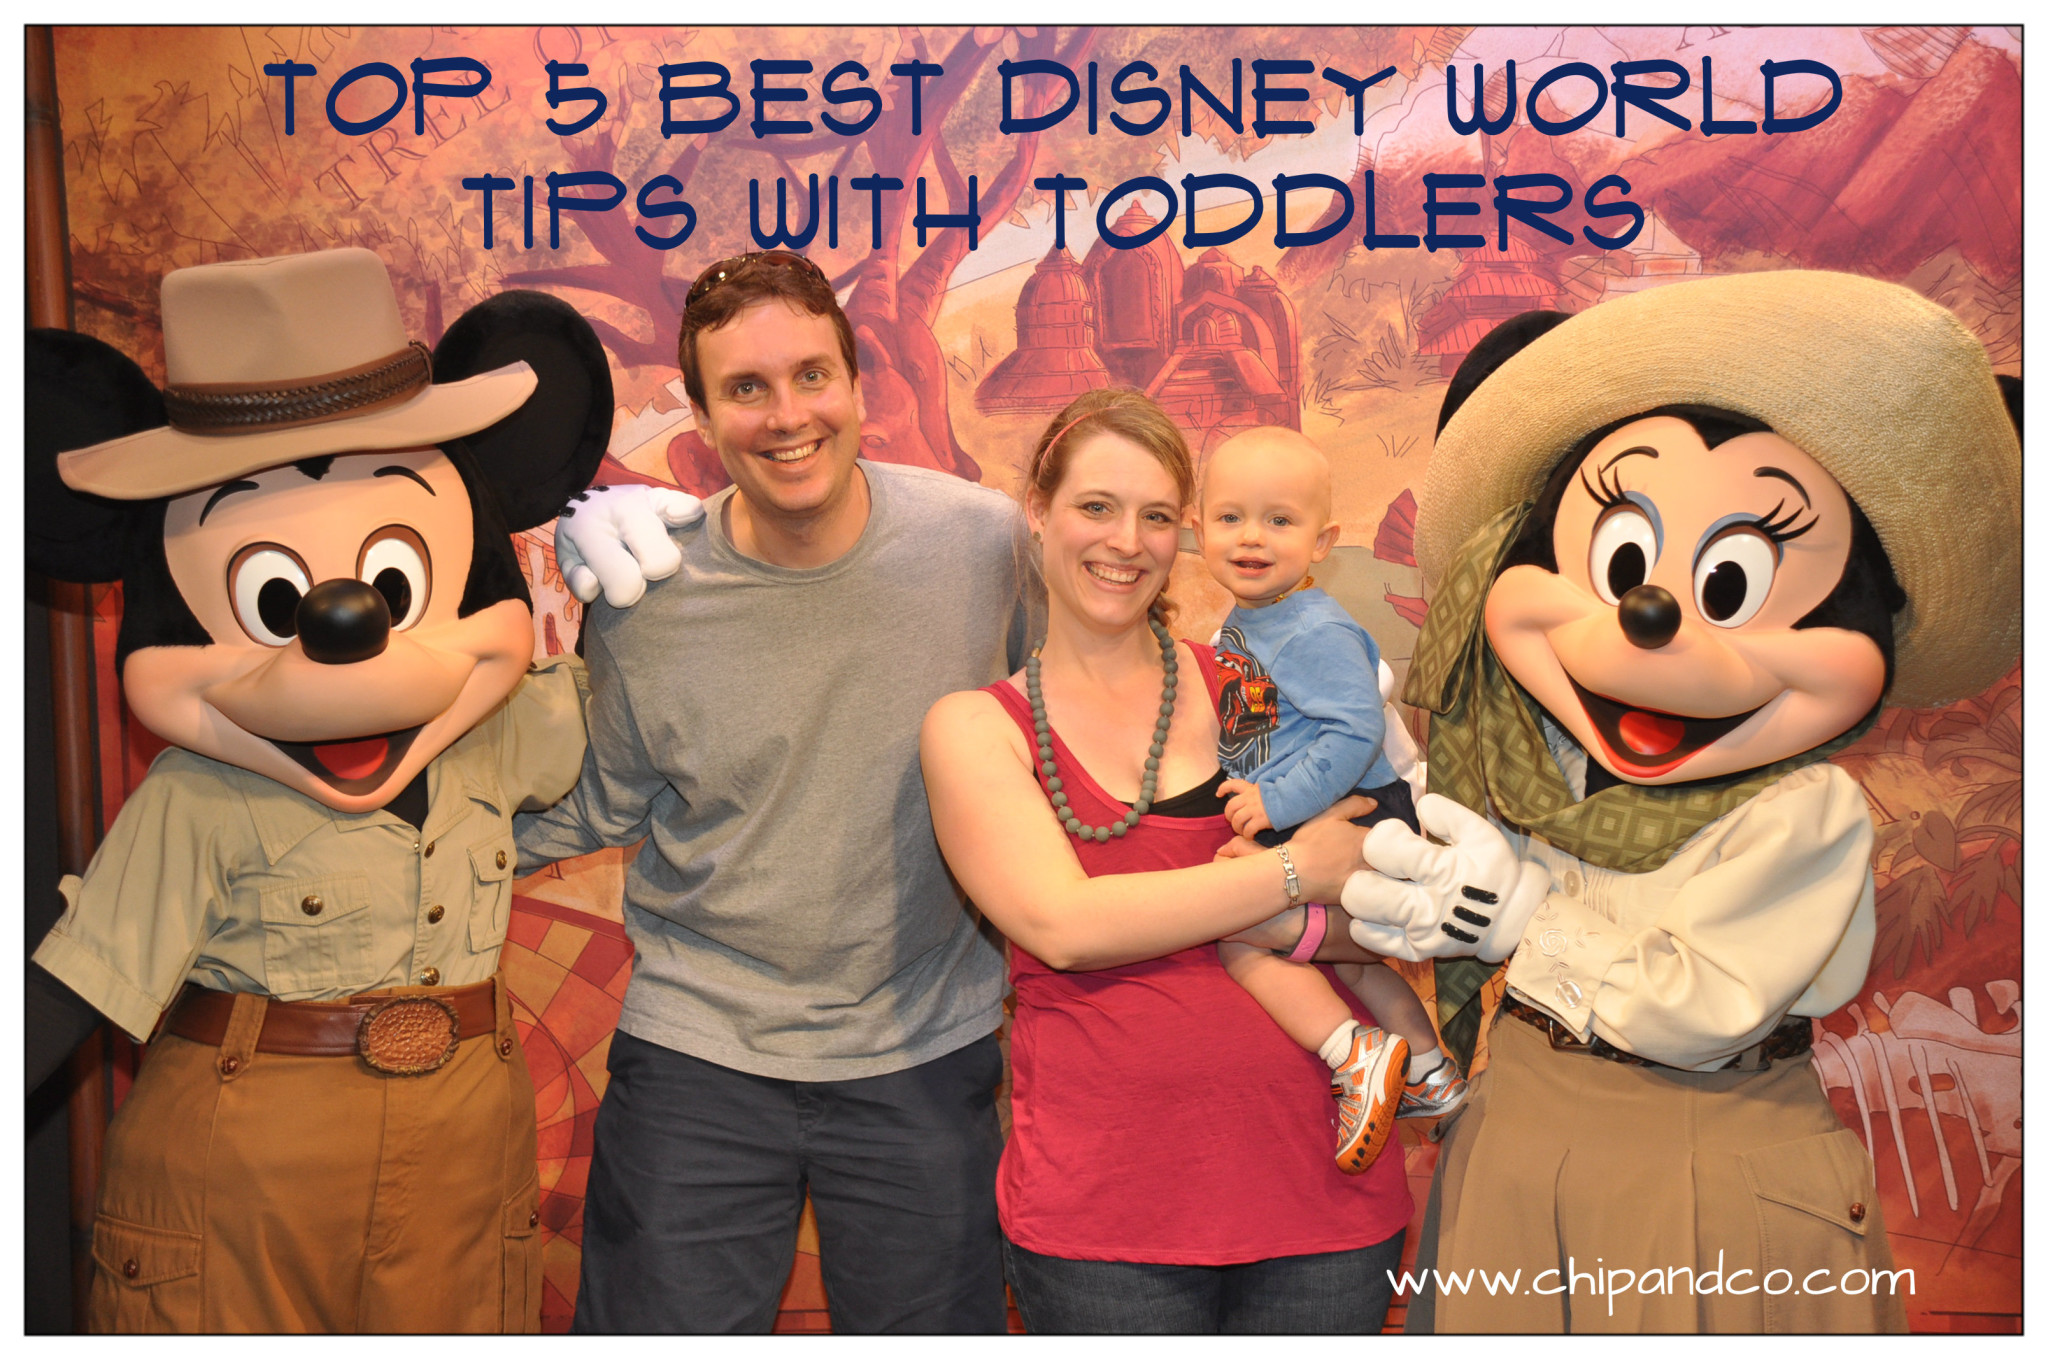 Top 5 BEST Disney World Tips with Toddlers